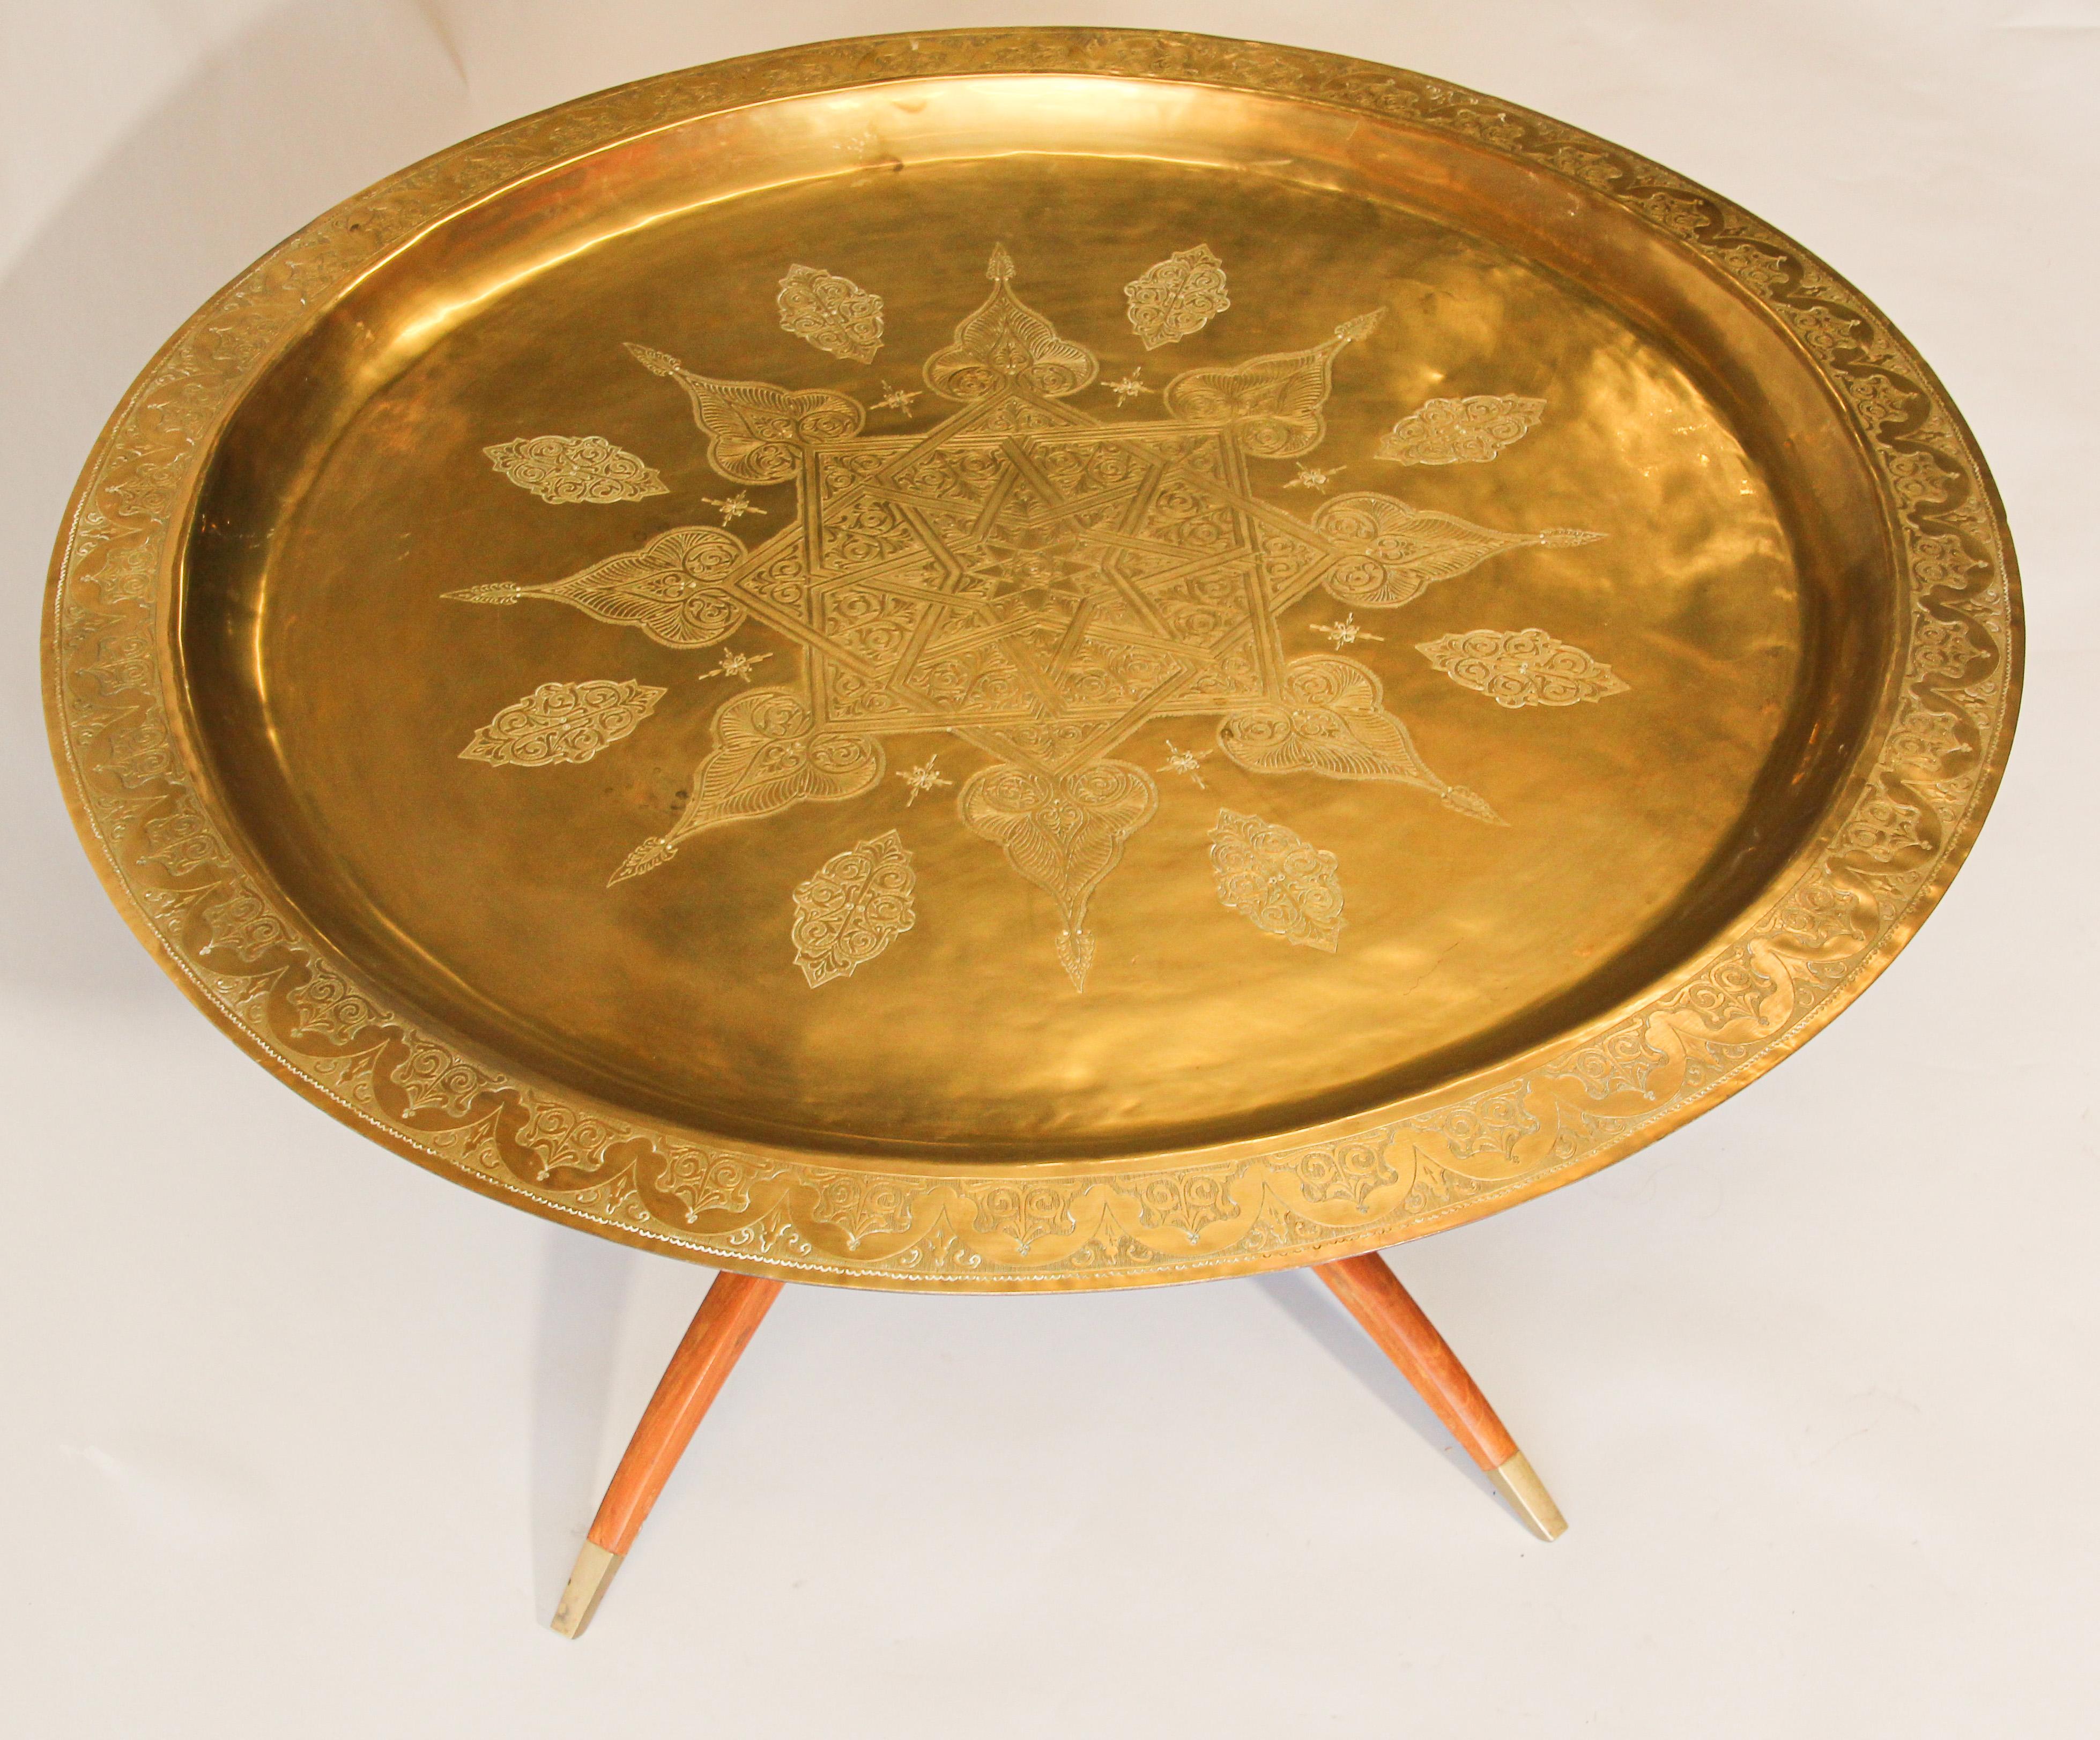 Engraved and embossed large 39 inches round midcentury Anglo-Indian brass tray table.
Polished brass Moroccan tray, very good condition, standing on folding mahogany base with six legs.
Large metal hand-hammered brass tray coffee table.
Middle